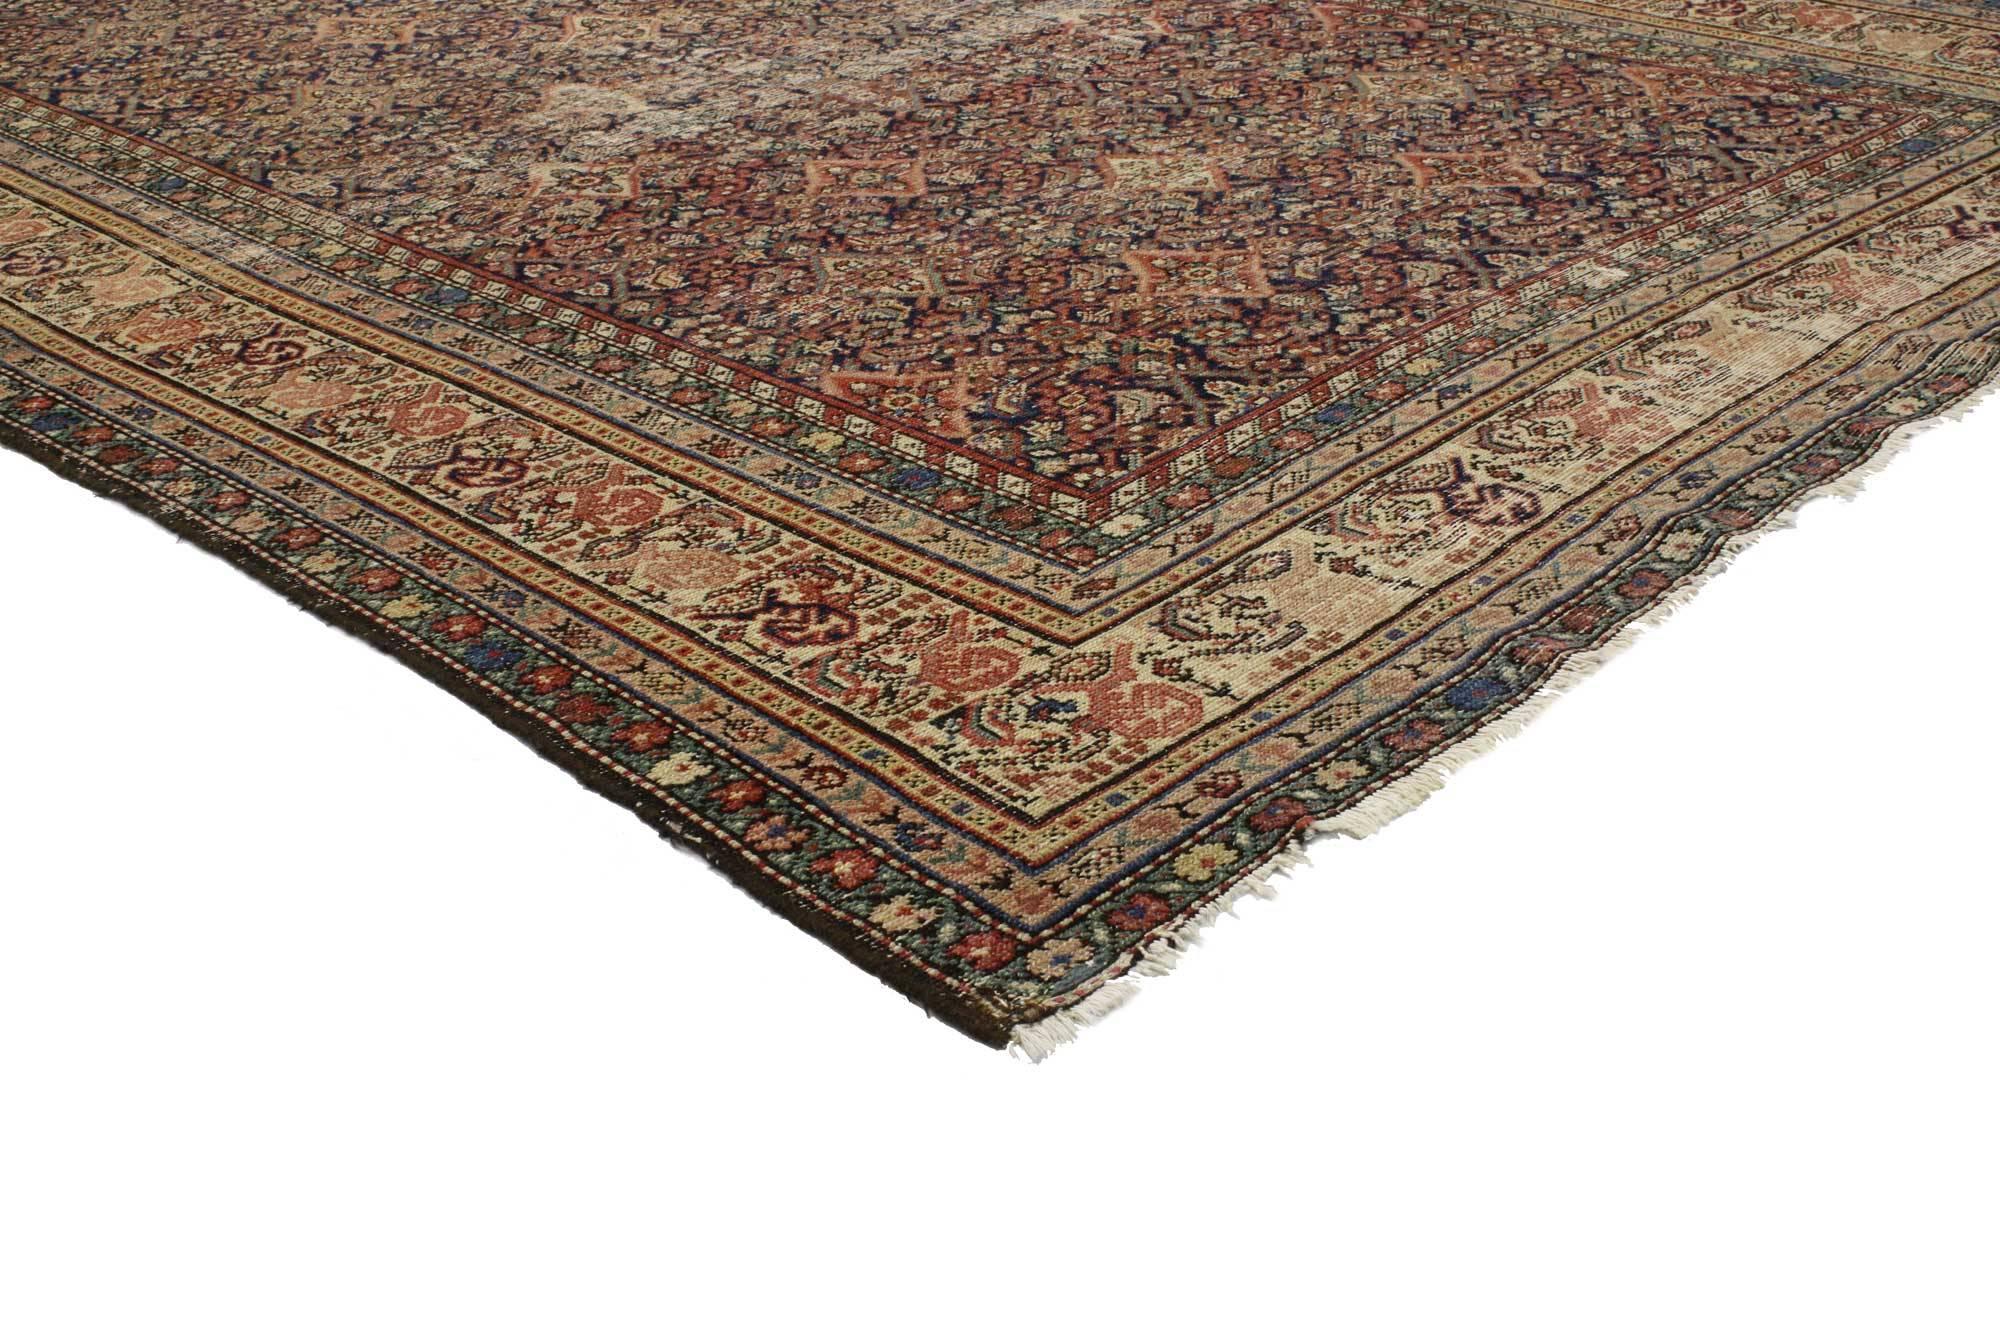 76762, distressed antique Persian Malayer gallery rug, long living room rug. This hand-knotted distressed antique Persian Malayer gallery rug features an all-over Herati pattern. It is framed with a geometric border flanked by triple guard bands.